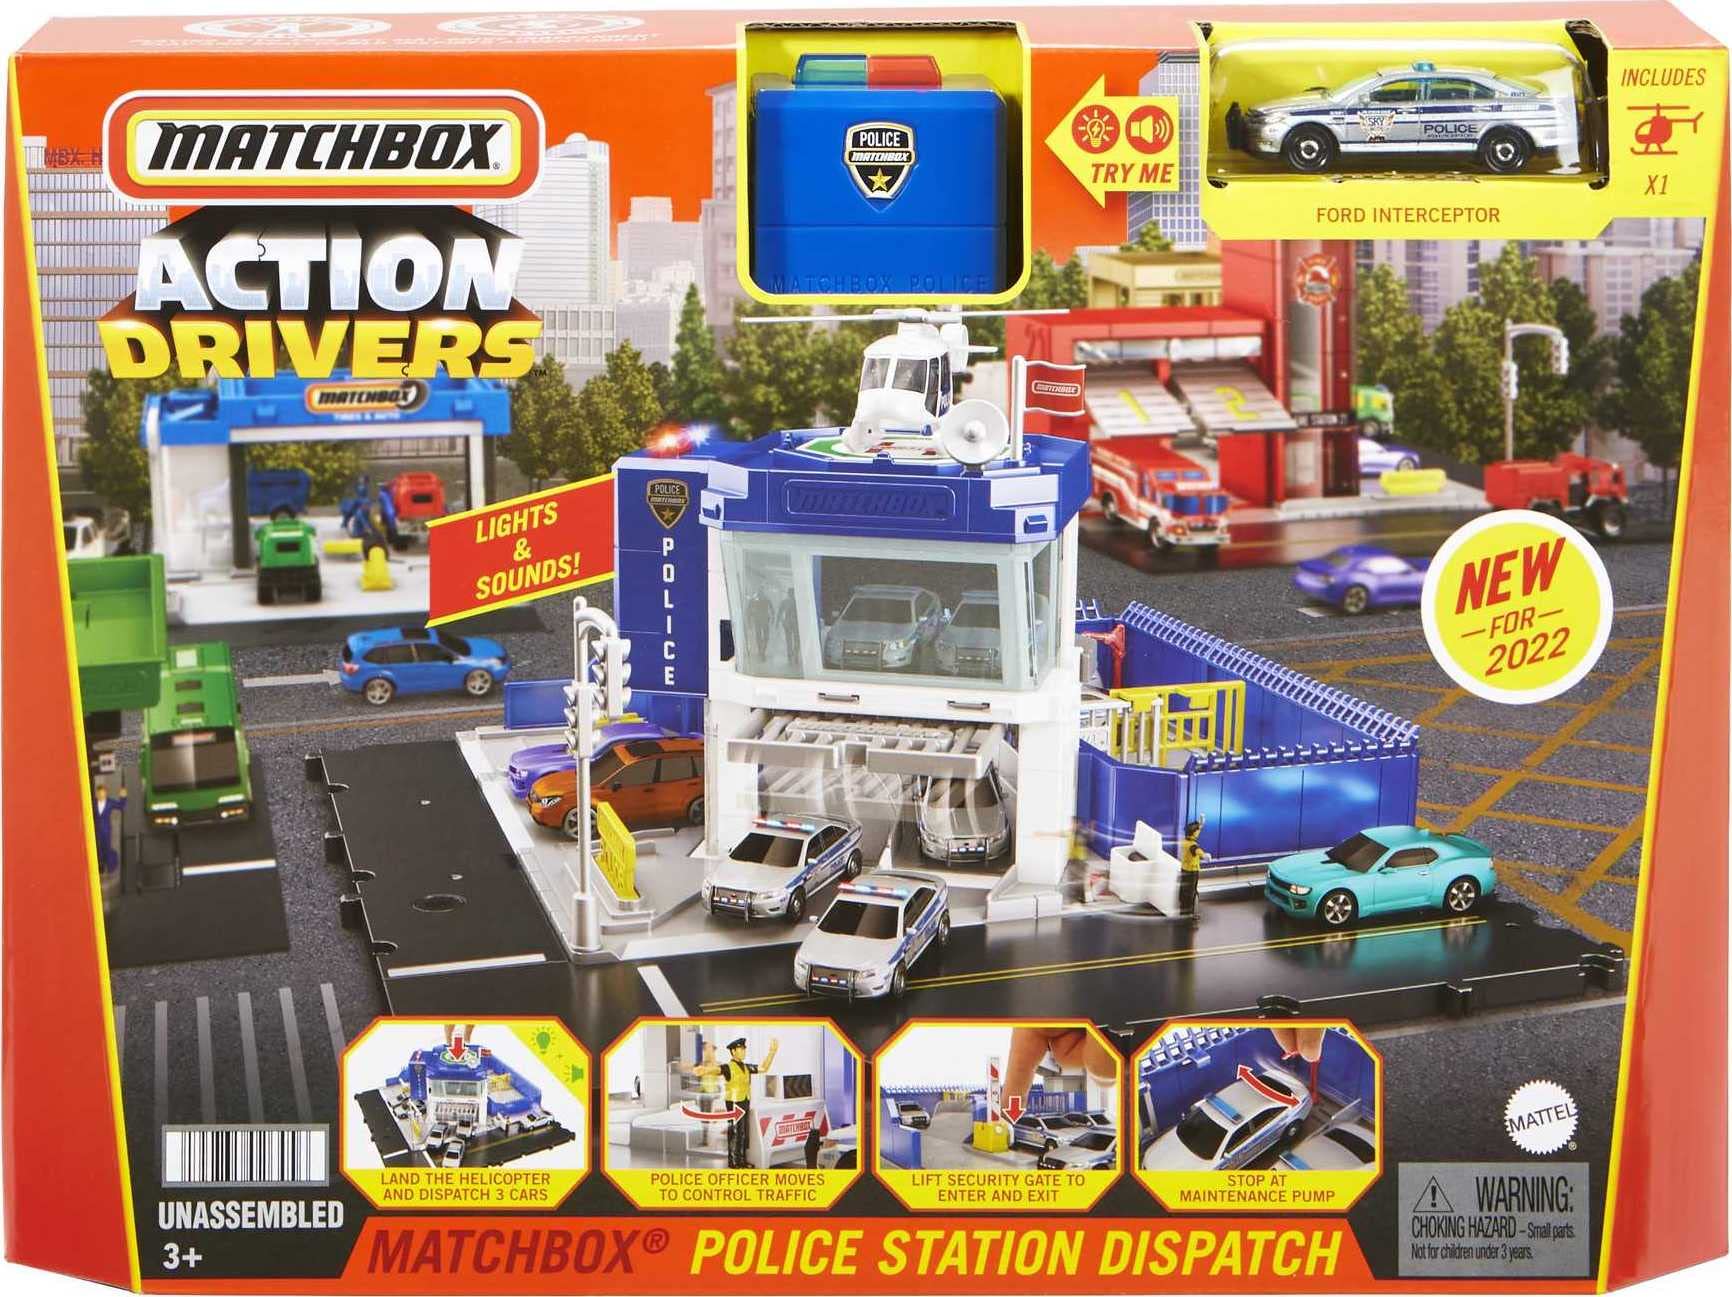 Matchbox Action Drivers Police Station Dispatch Playset with 1 Helicopter & 1 Ford Police Car, with Lights & Sounds